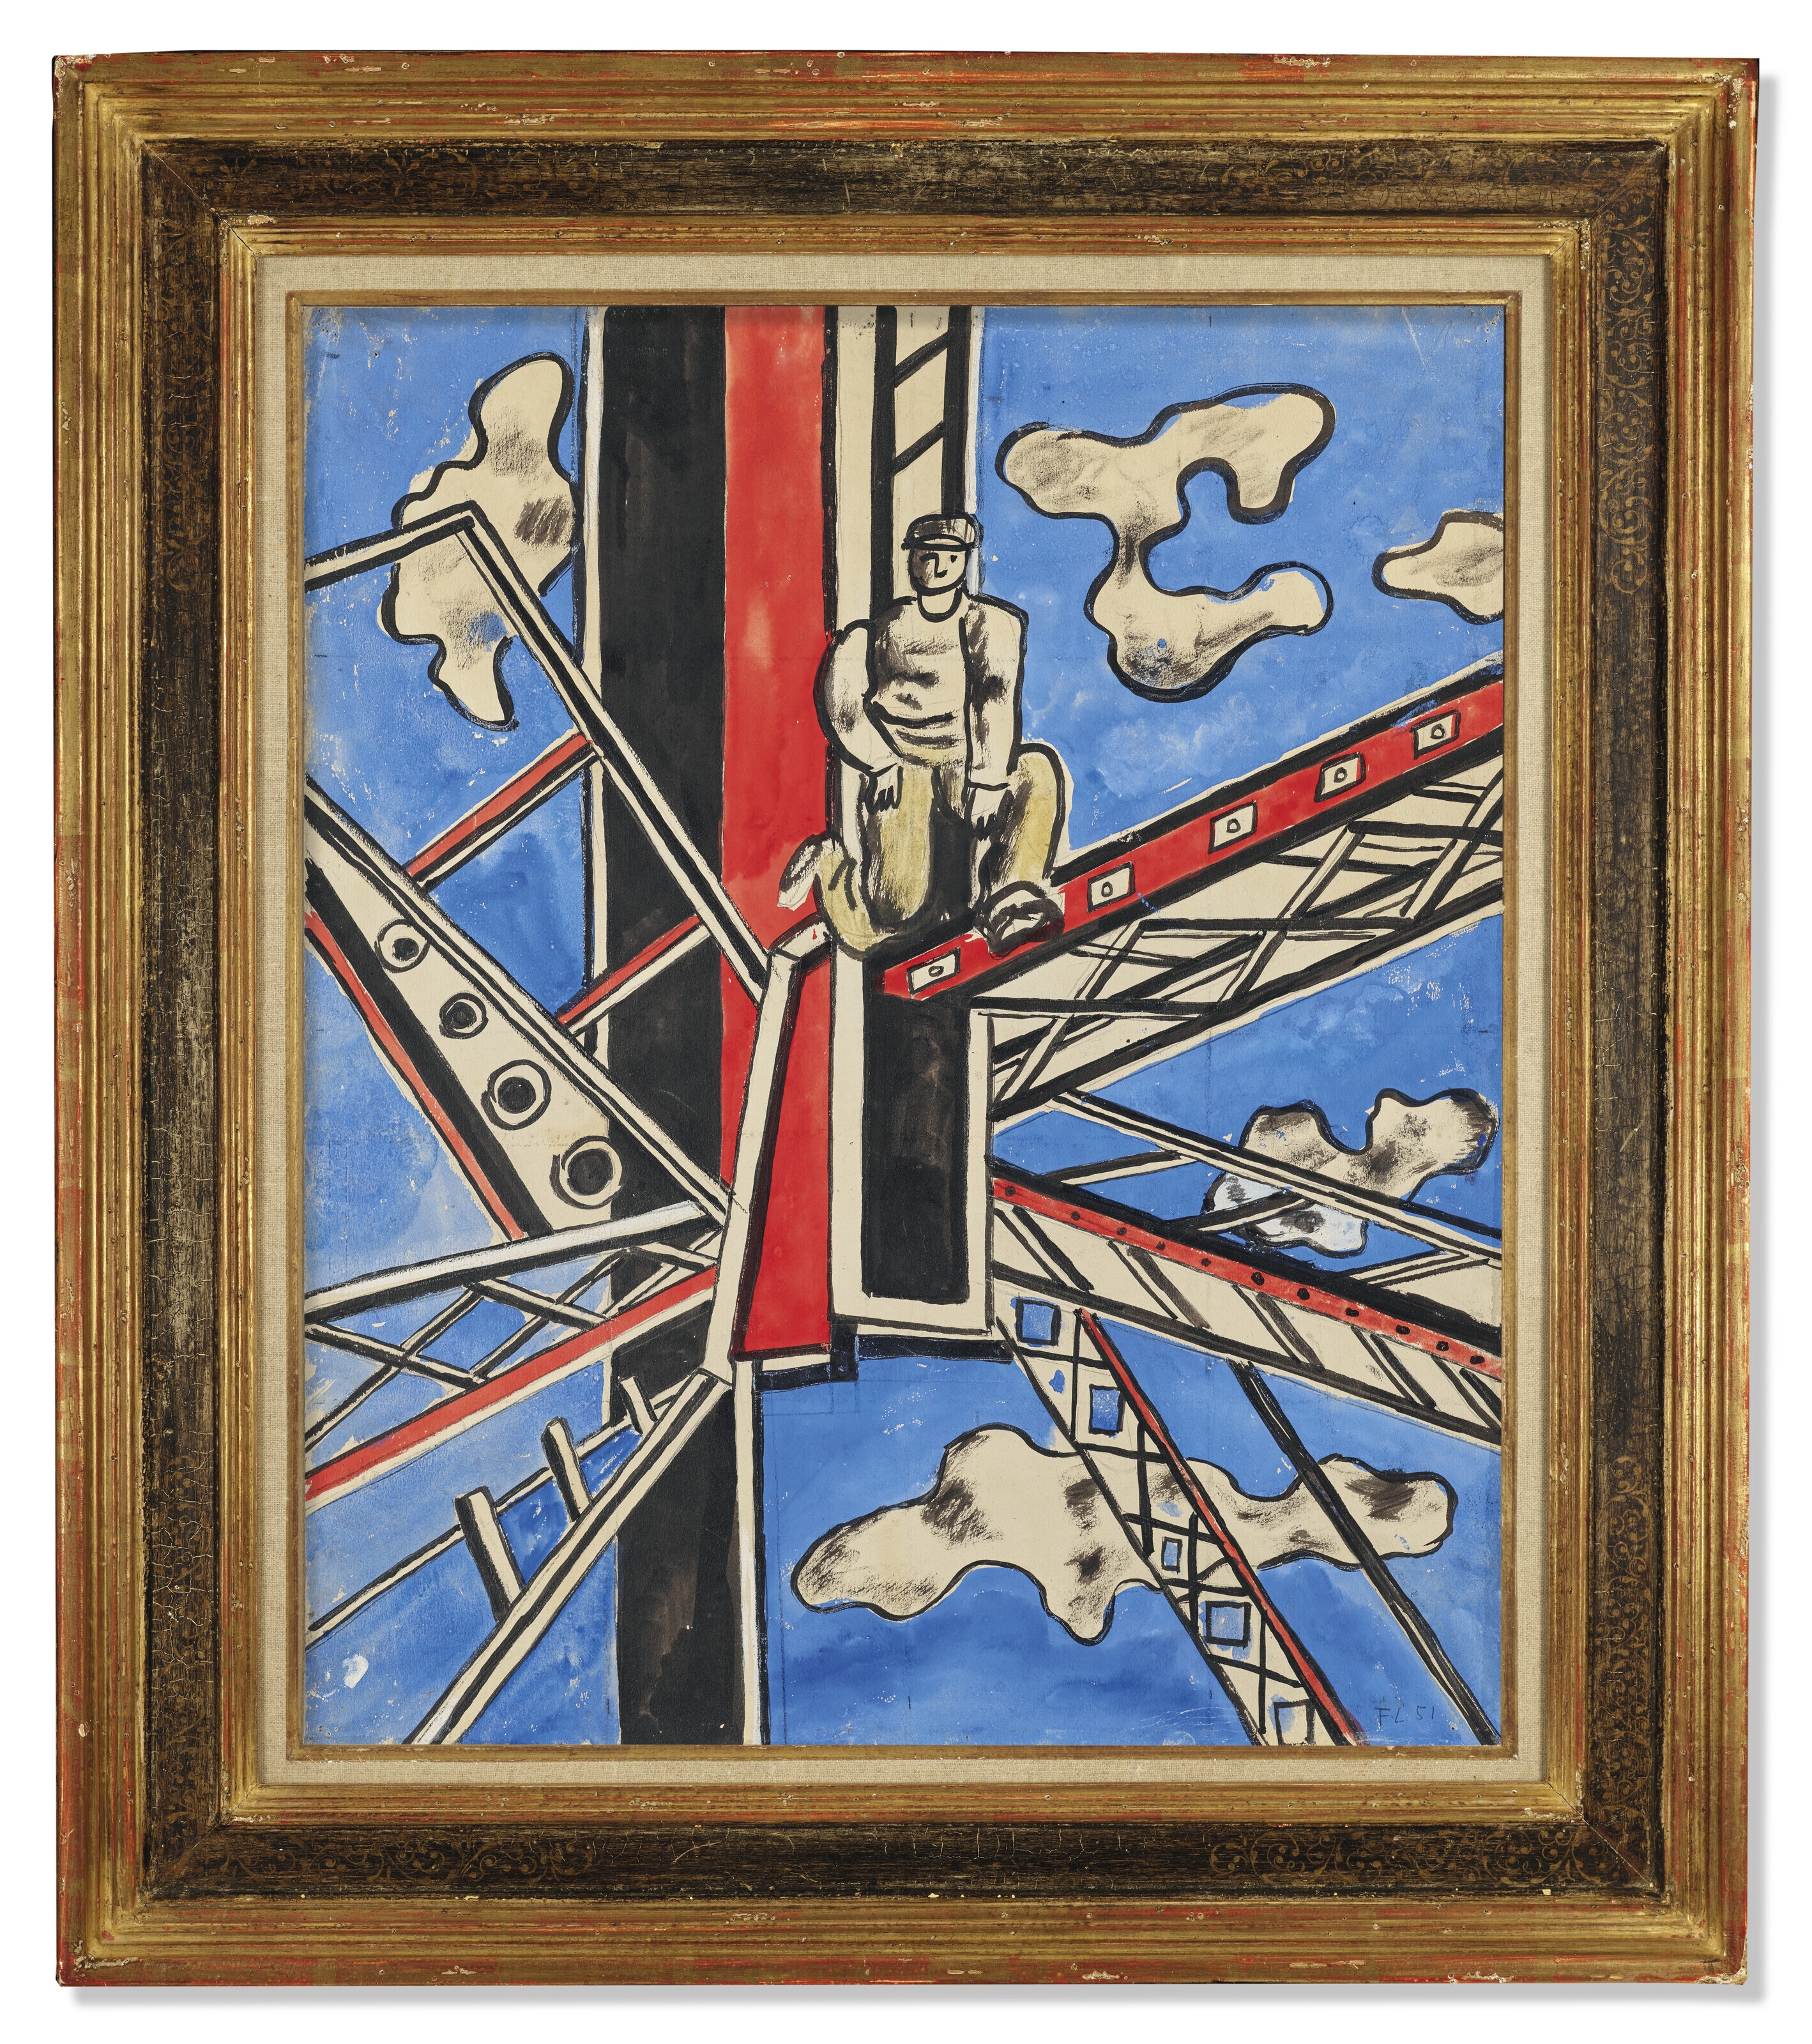 Artwork by Fernand Léger, Étude pour "Les Constructeurs", Made of gouache, brush and India ink and traces of pencil on paper